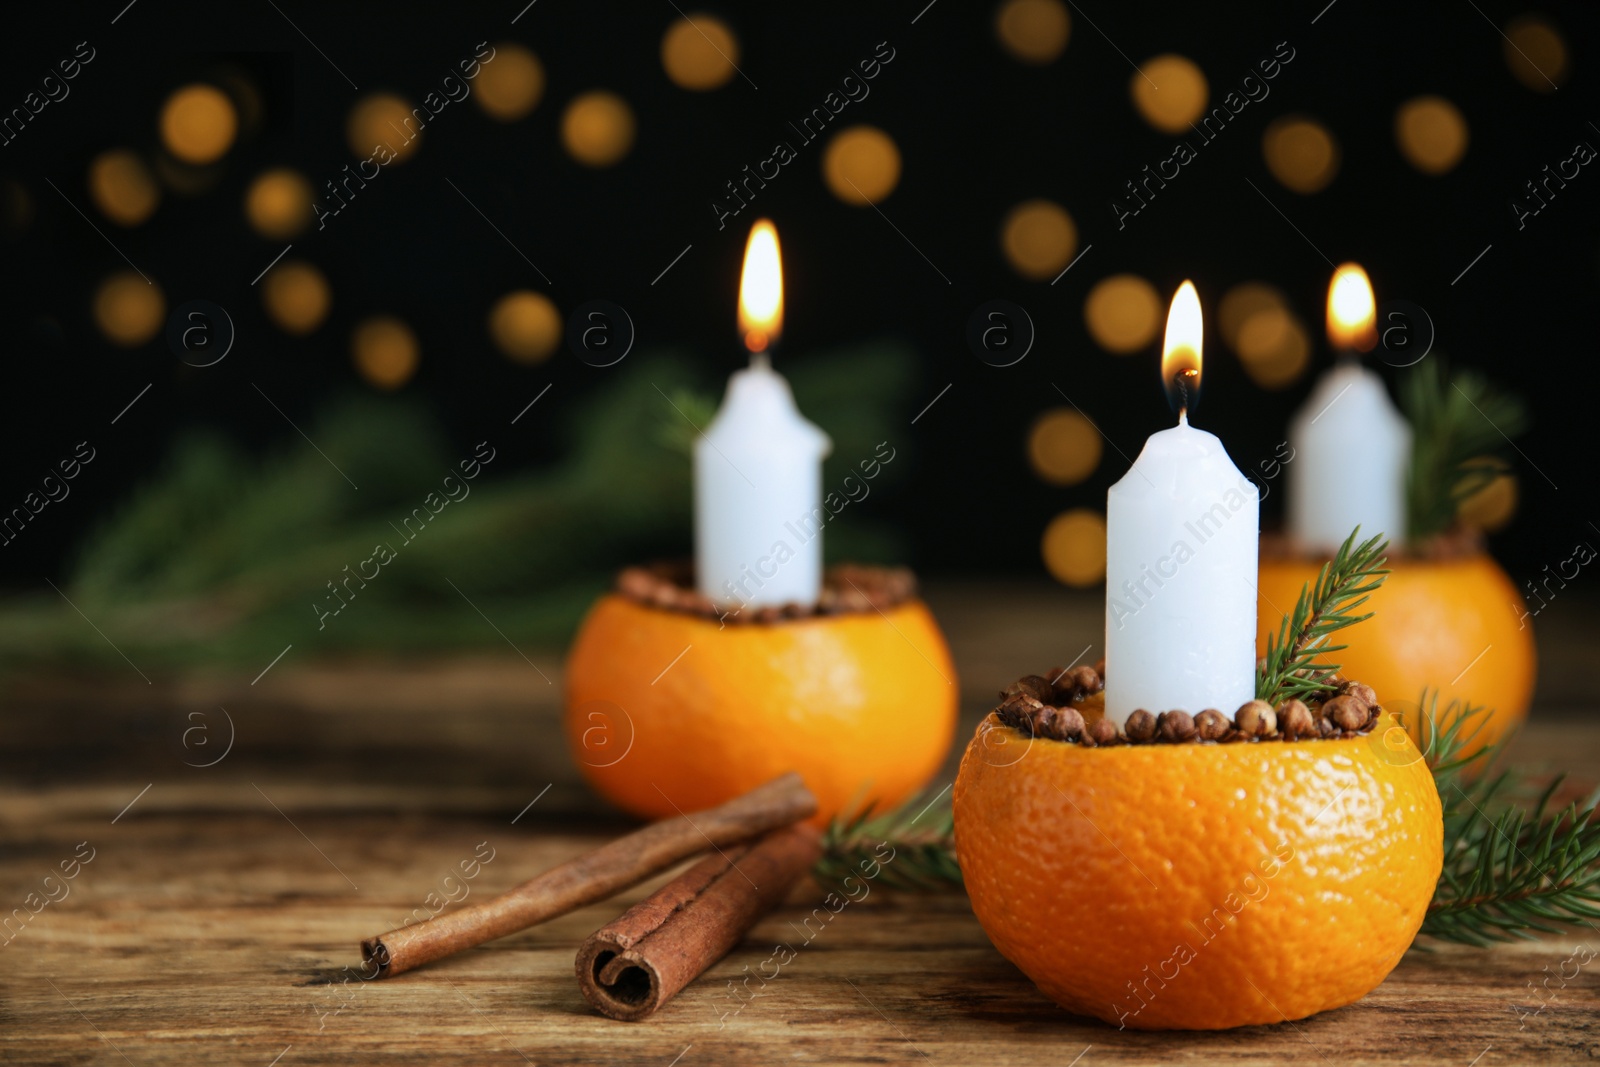 Photo of Burning candle in tangerine peel as holder on wooden table against black background, space for text